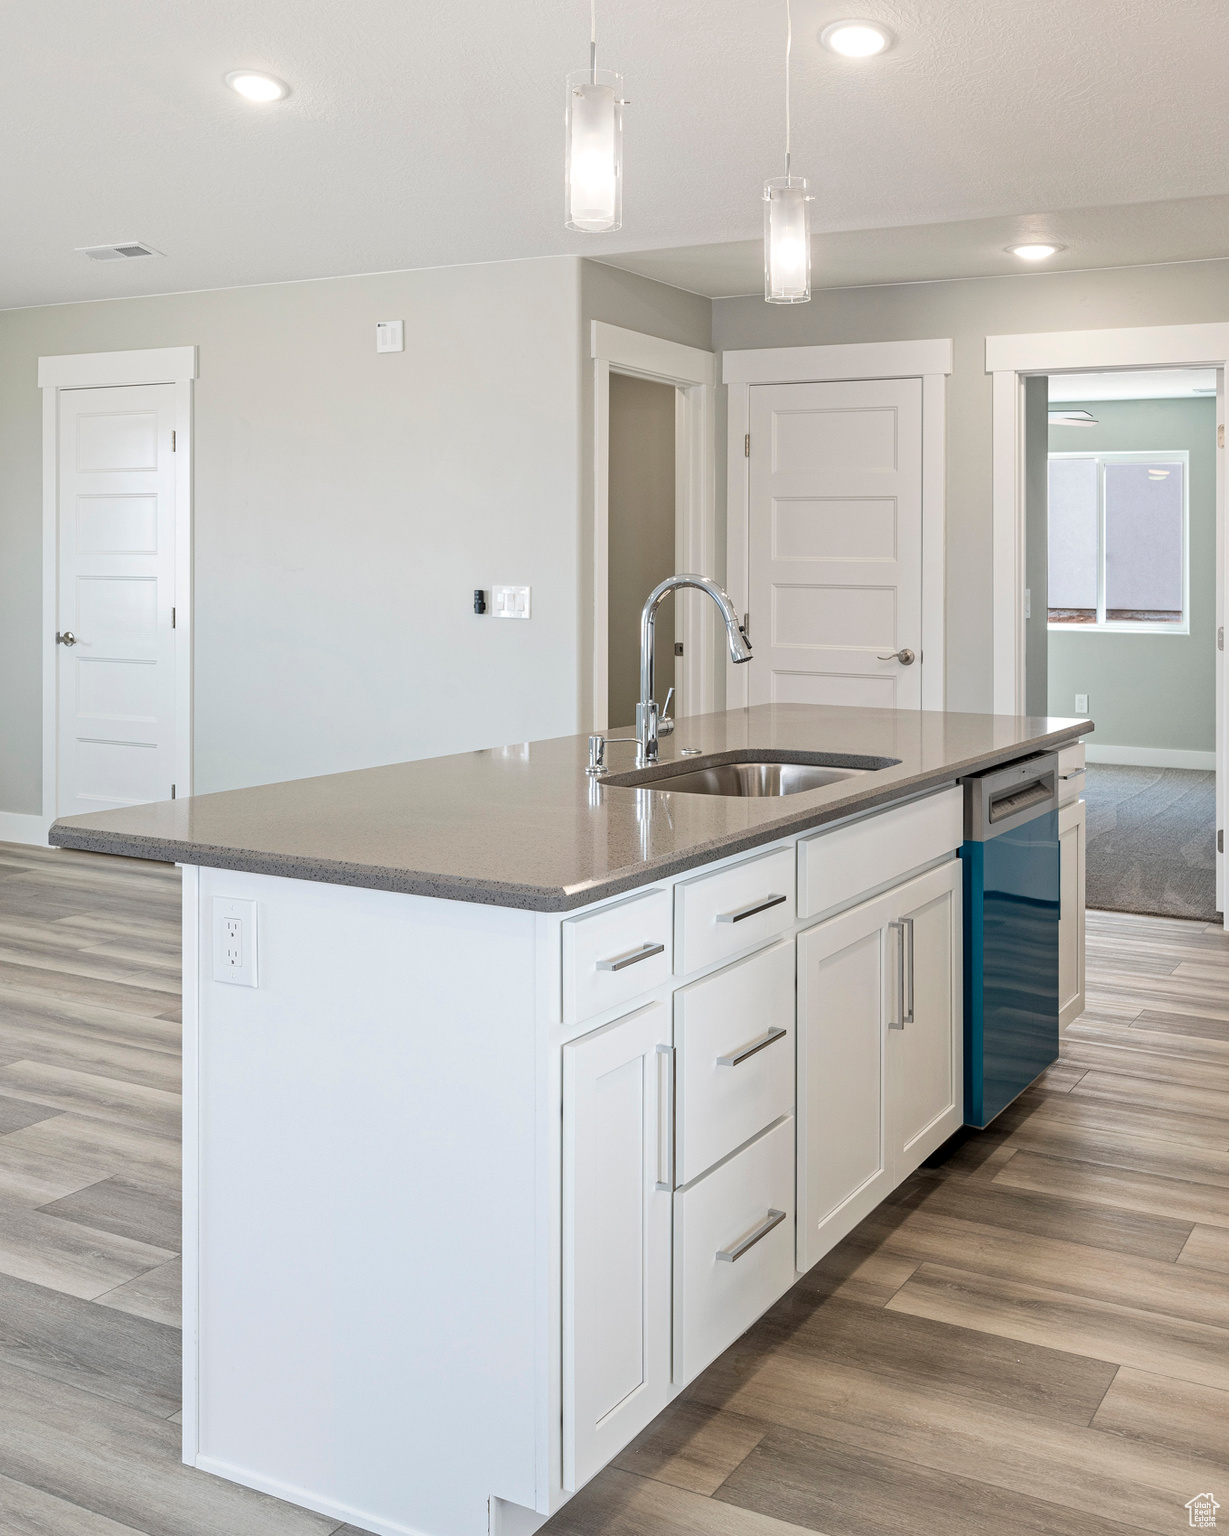 Kitchen featuring sink, light hardwood / wood-style floors, stainless steel dishwasher, and a kitchen island with sink